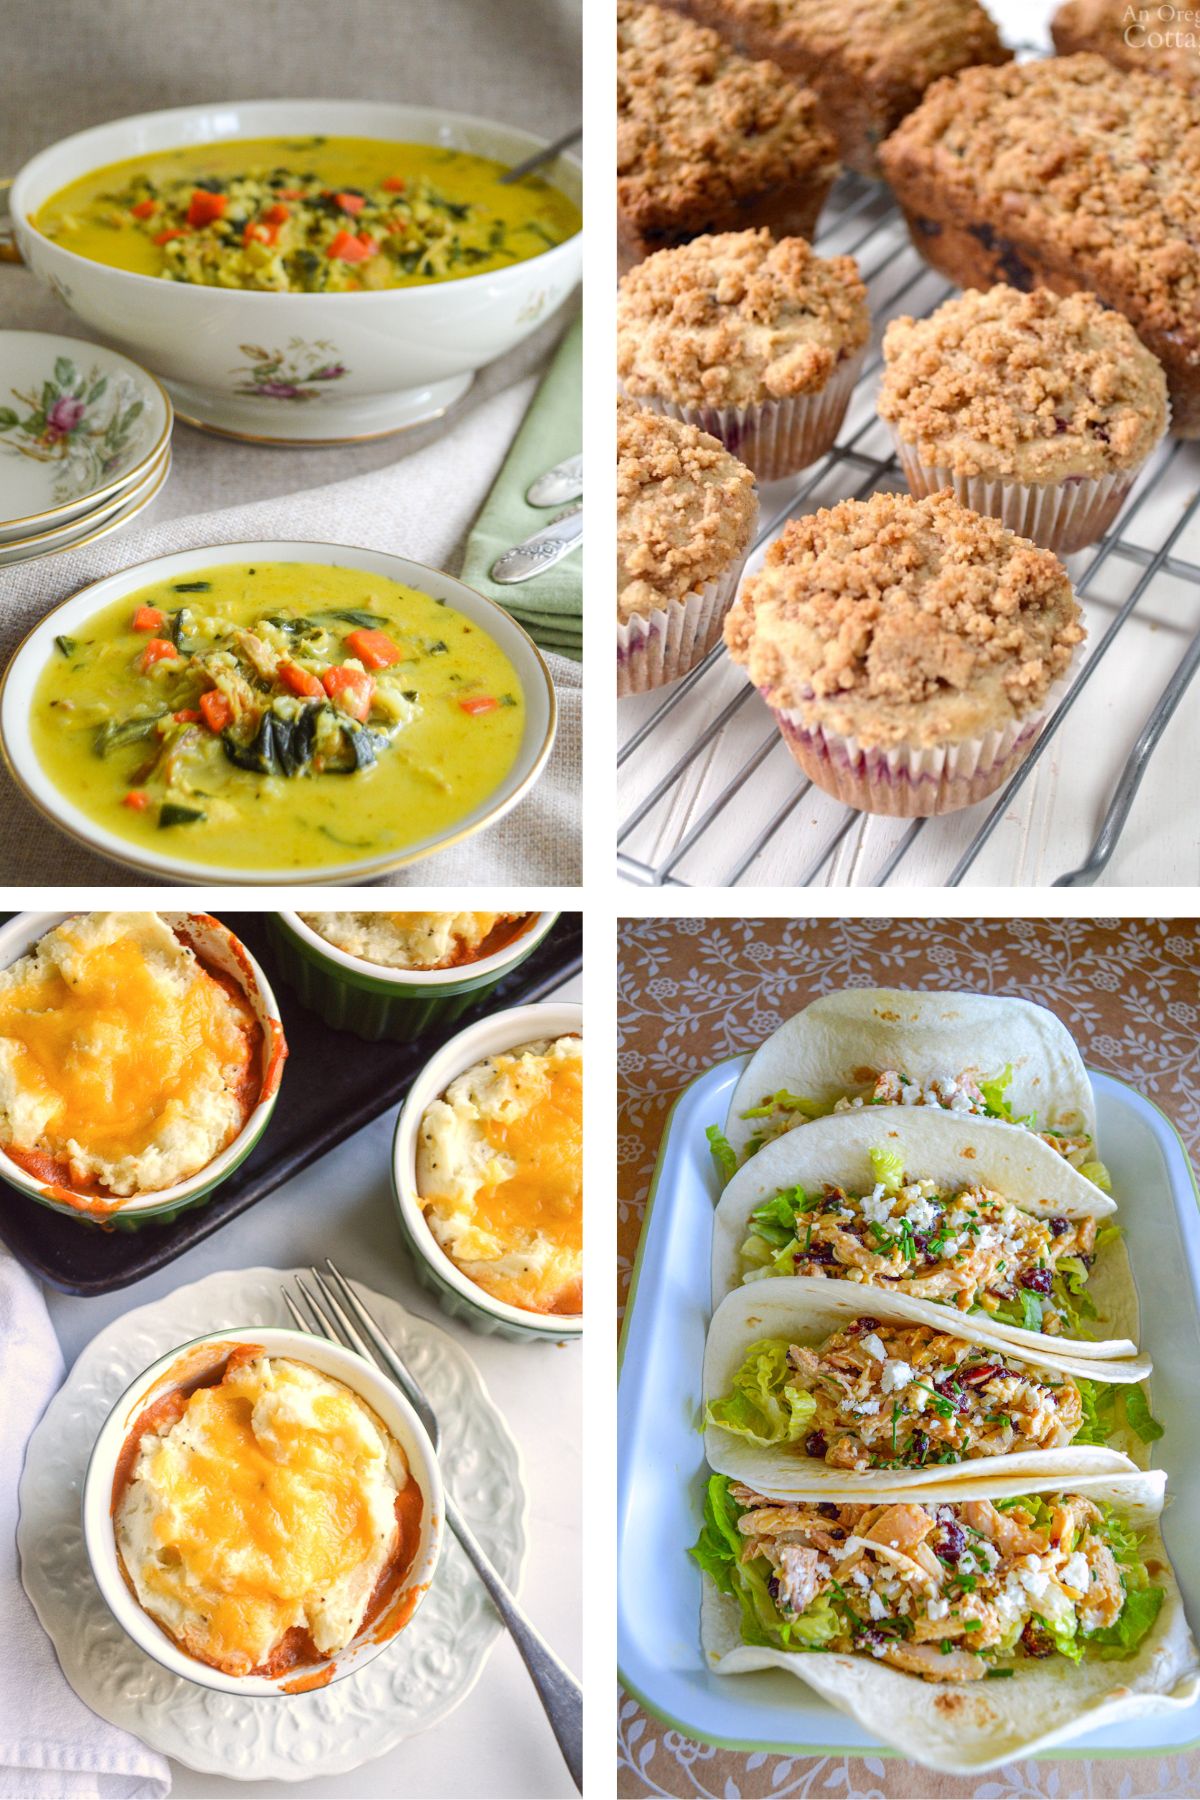 four dishes made from Thanksgiving leftovers-soup, muffins, shepherd's pie, and turkey salad.